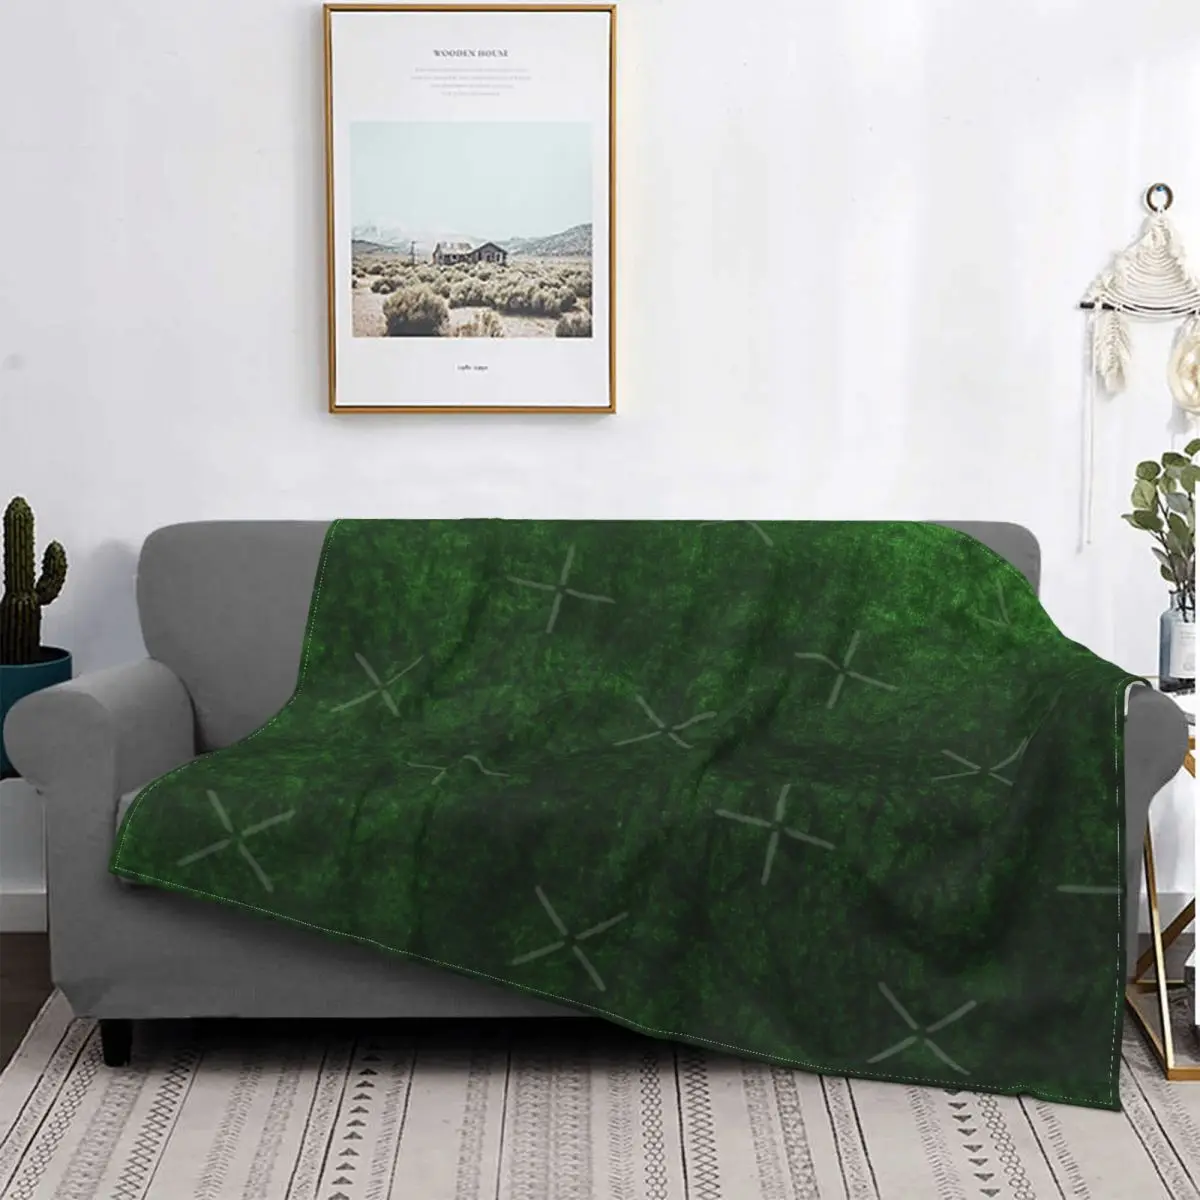 

Emerald Green Grass Velvet Texture 2 Blanket Bedspread On The Bed Soft Bed Covers Aesthetic Hairy Winter Bed Covers